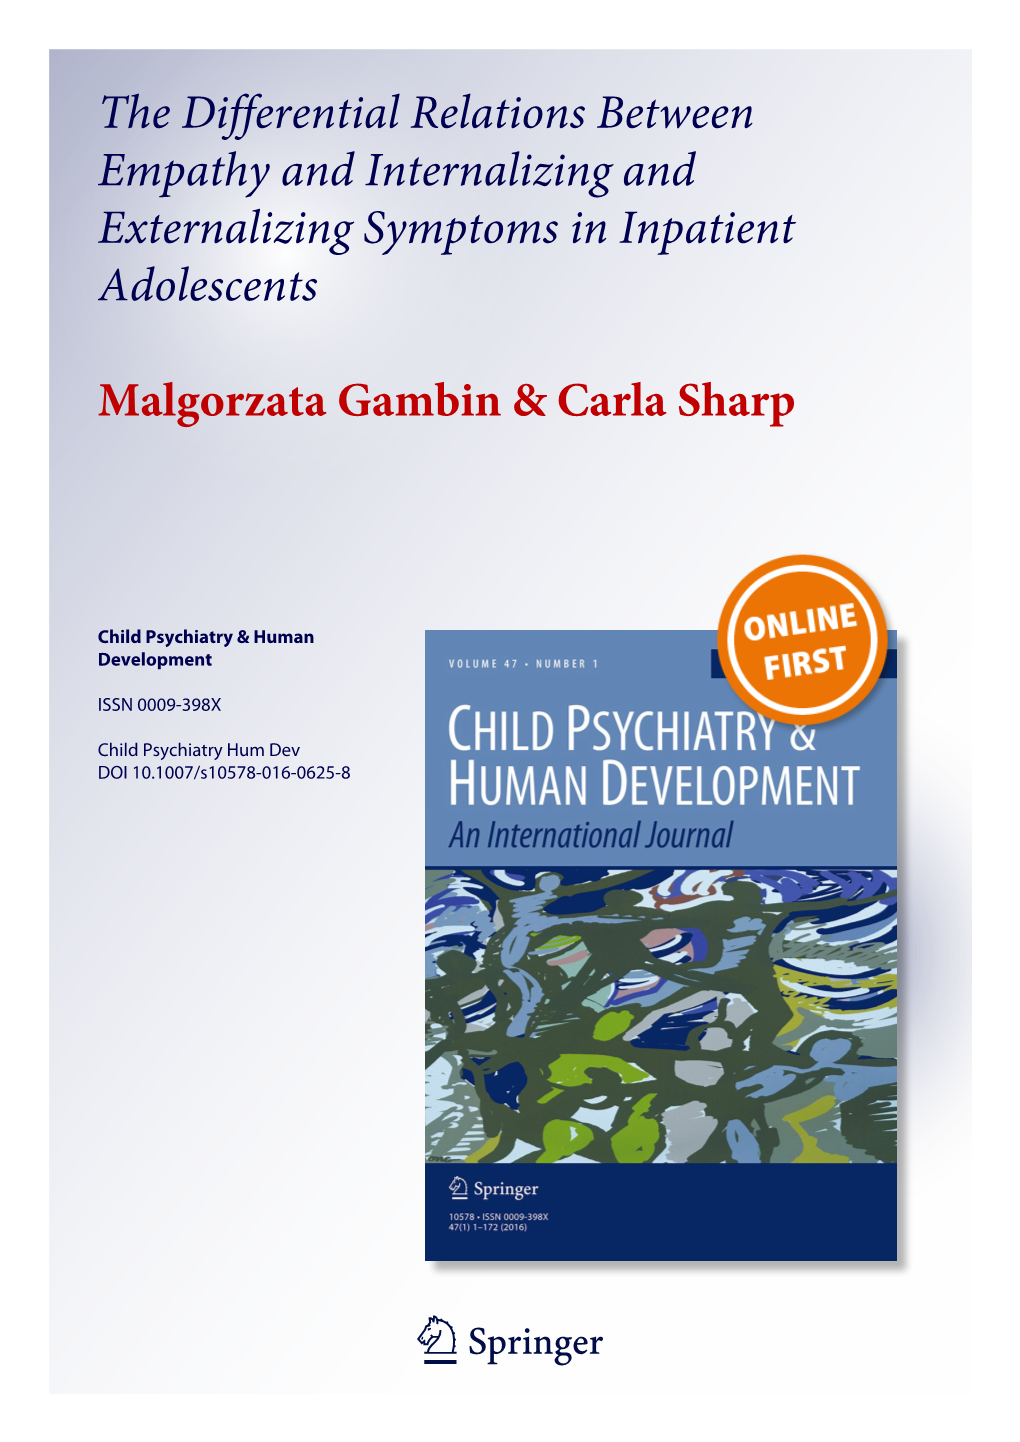 The Differential Relations Between Empathy and Internalizing and Externalizing Symptoms in Inpatient Adolescents